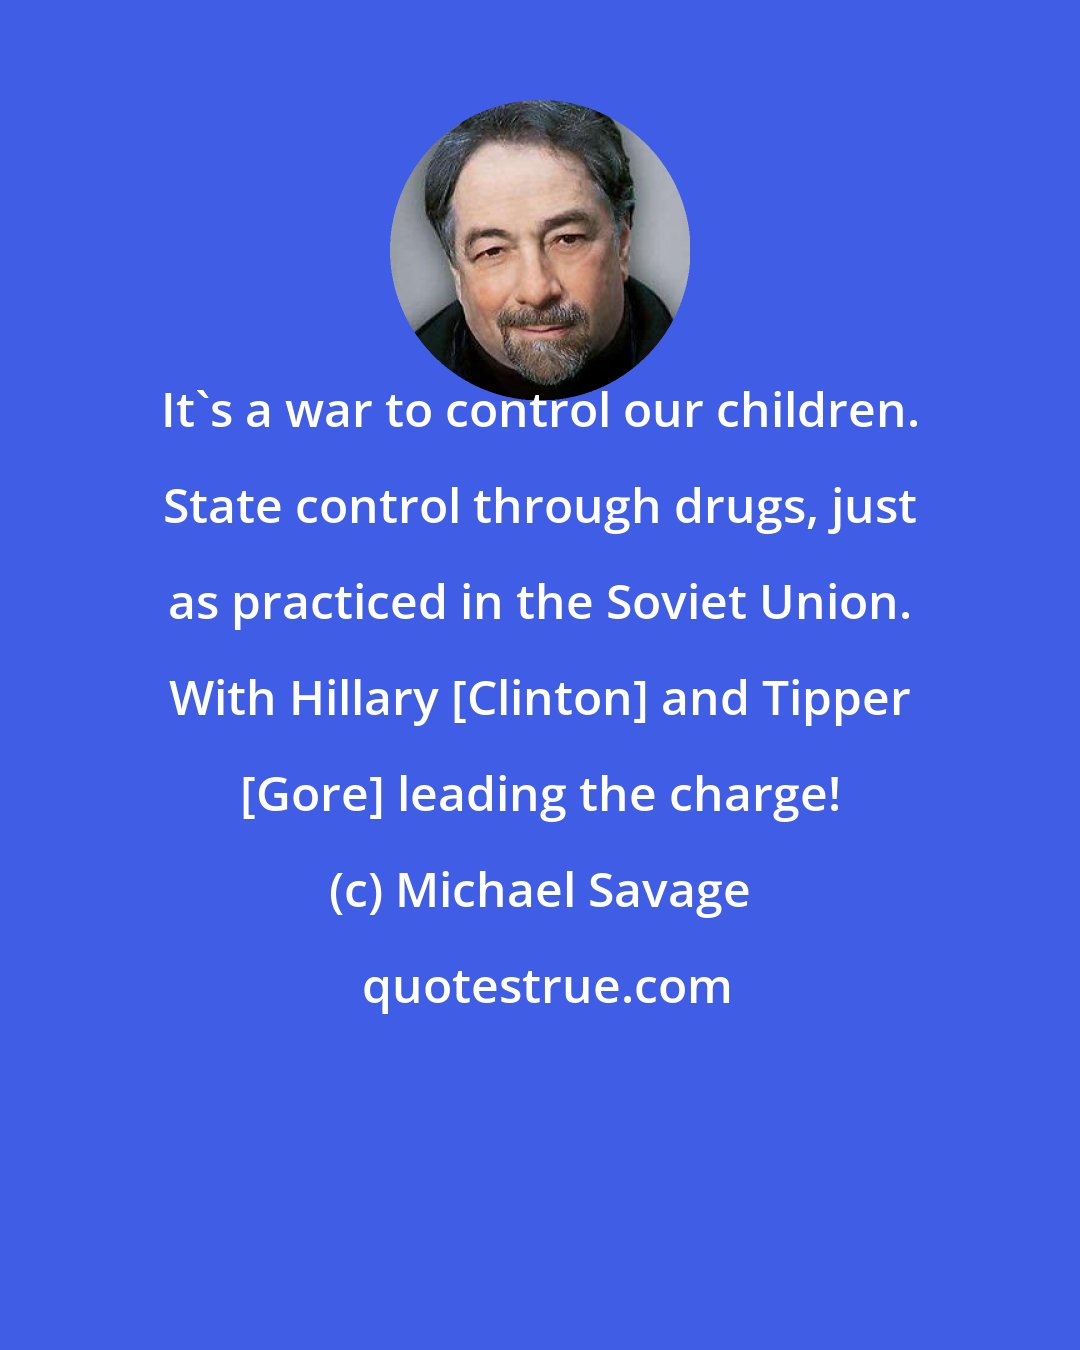 Michael Savage: It's a war to control our children. State control through drugs, just as practiced in the Soviet Union. With Hillary [Clinton] and Tipper [Gore] leading the charge!